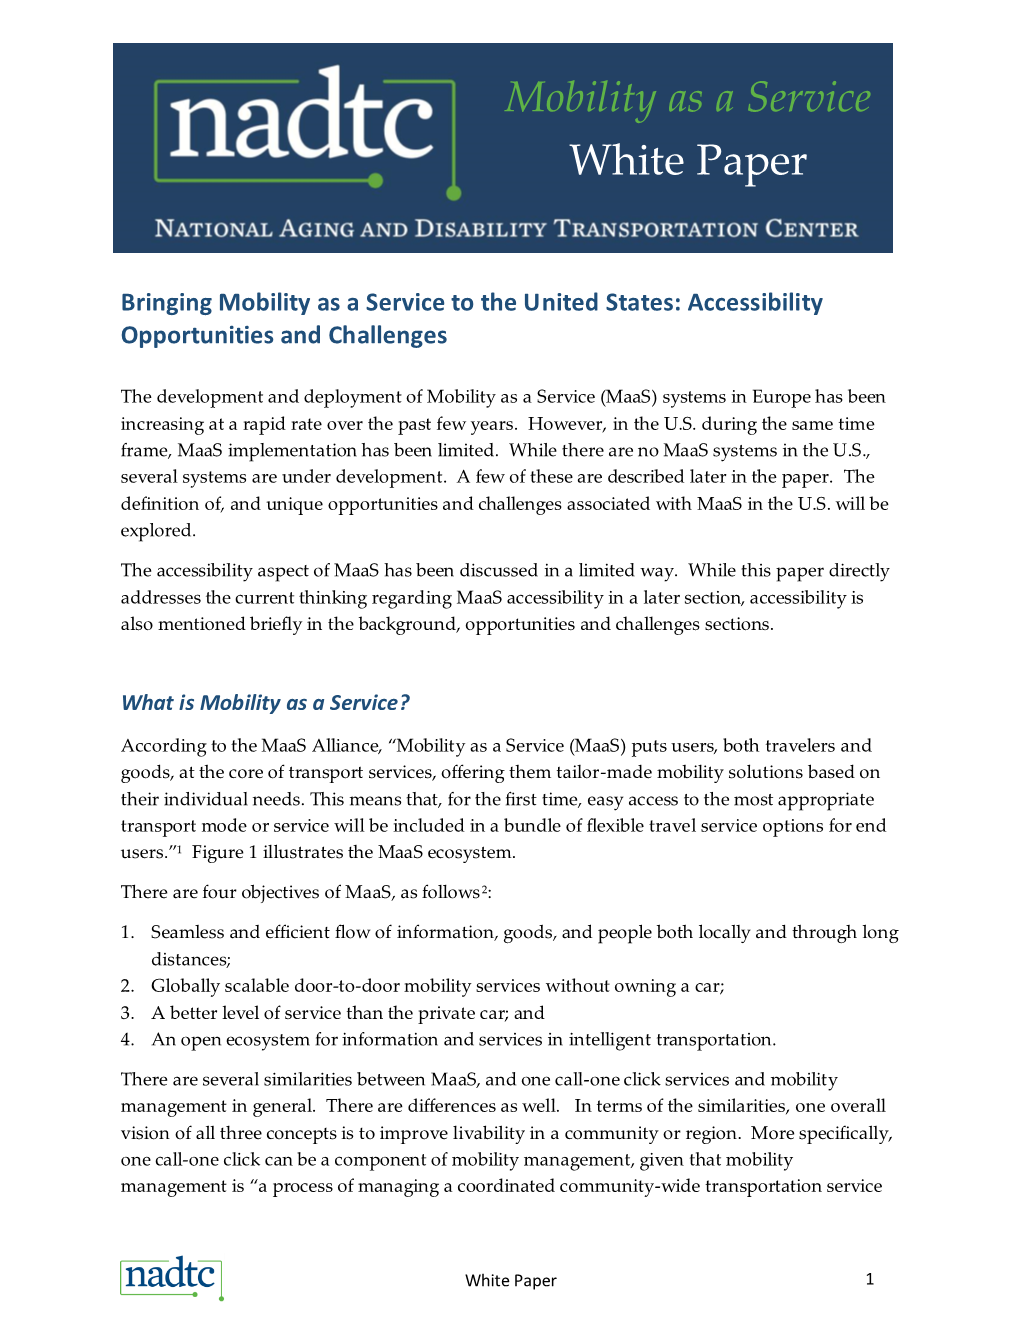 Mobility As a Service White Paper